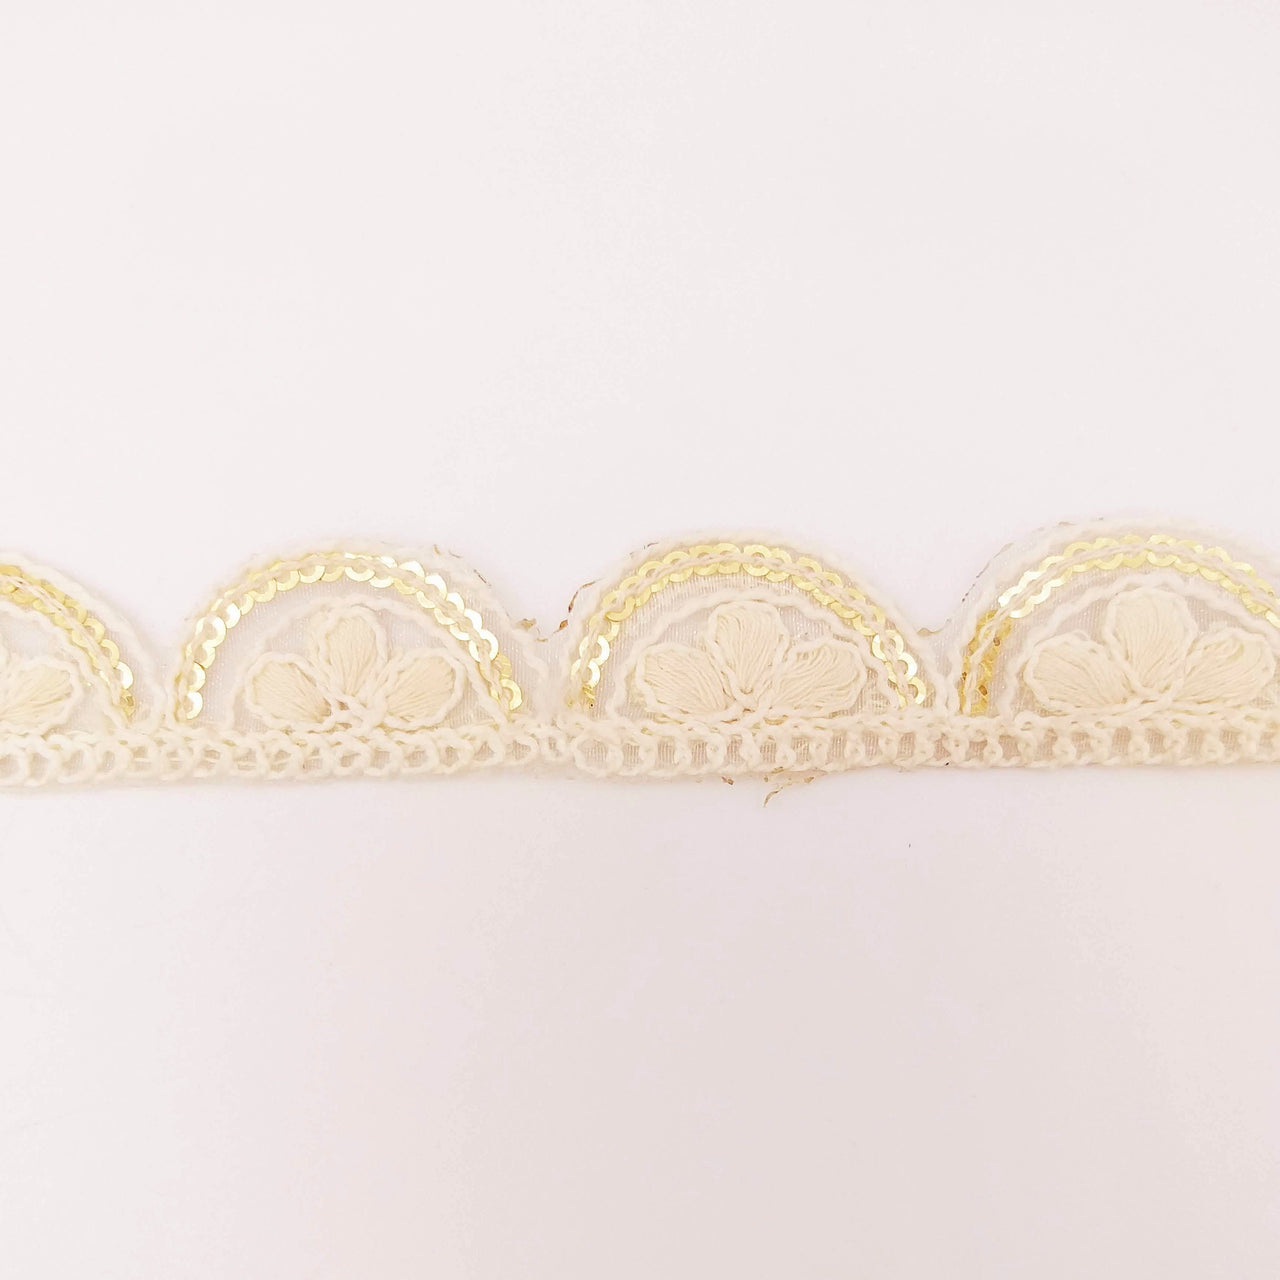 Off White Scallop Lace Trim Embroidered with Gold Sequins, Cutwork Trim, Scallops Wedding Trim